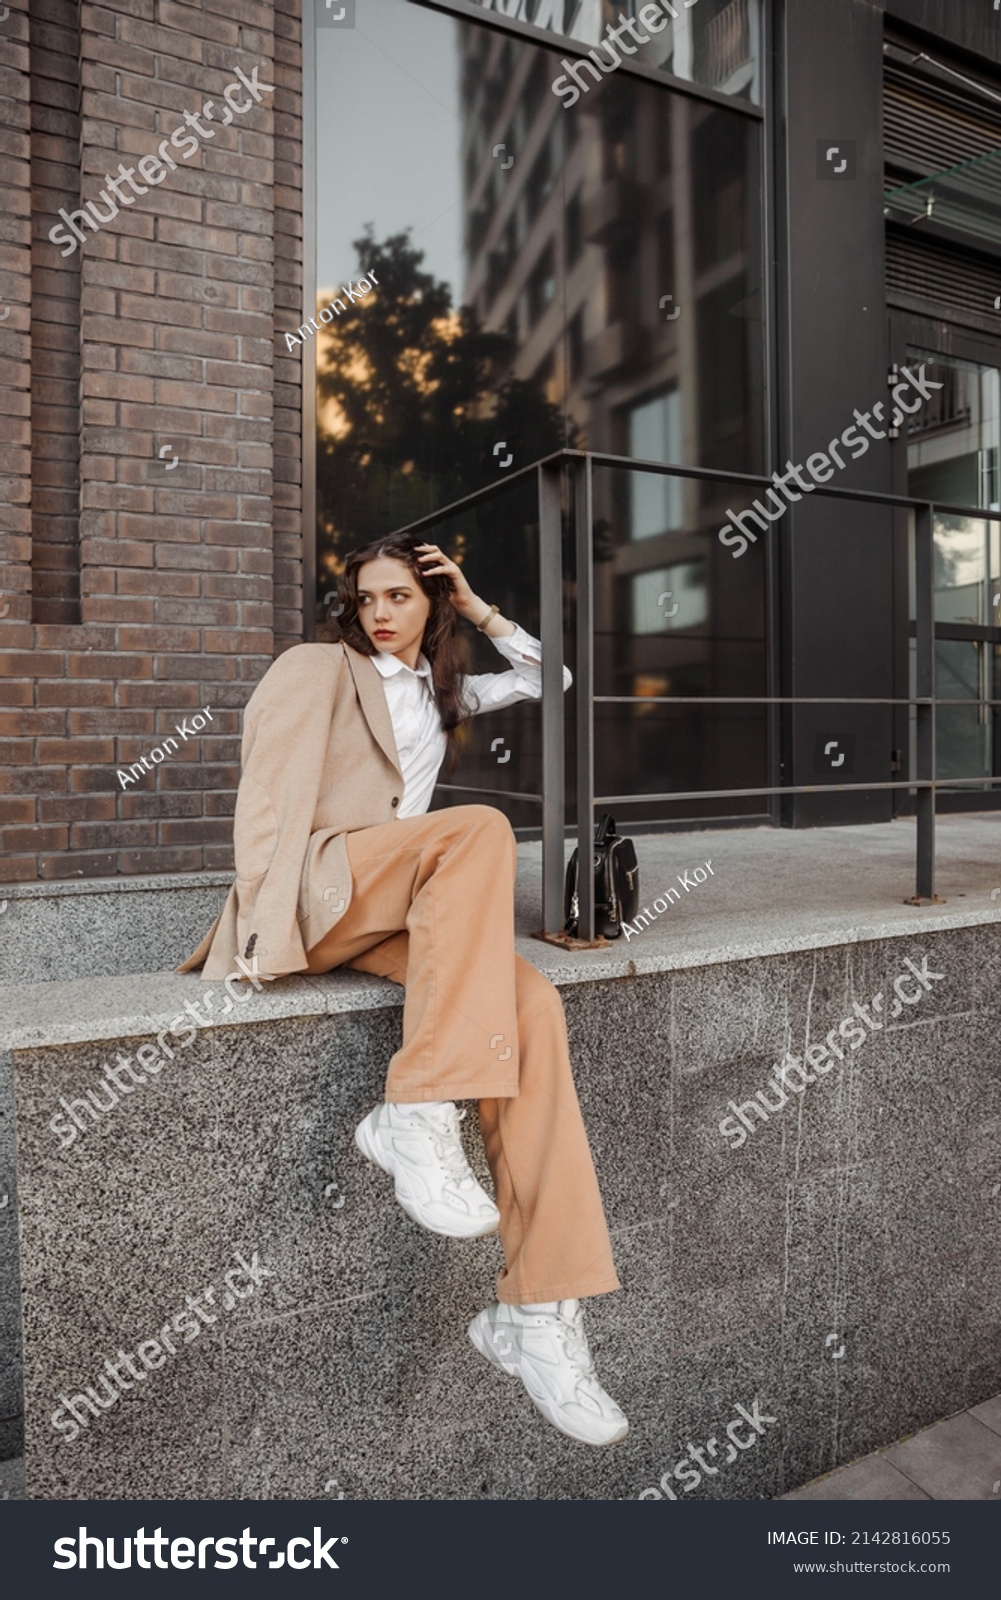  Tall stylish girl with oversized jacket posing near the railing and steps on the city background #2142816055